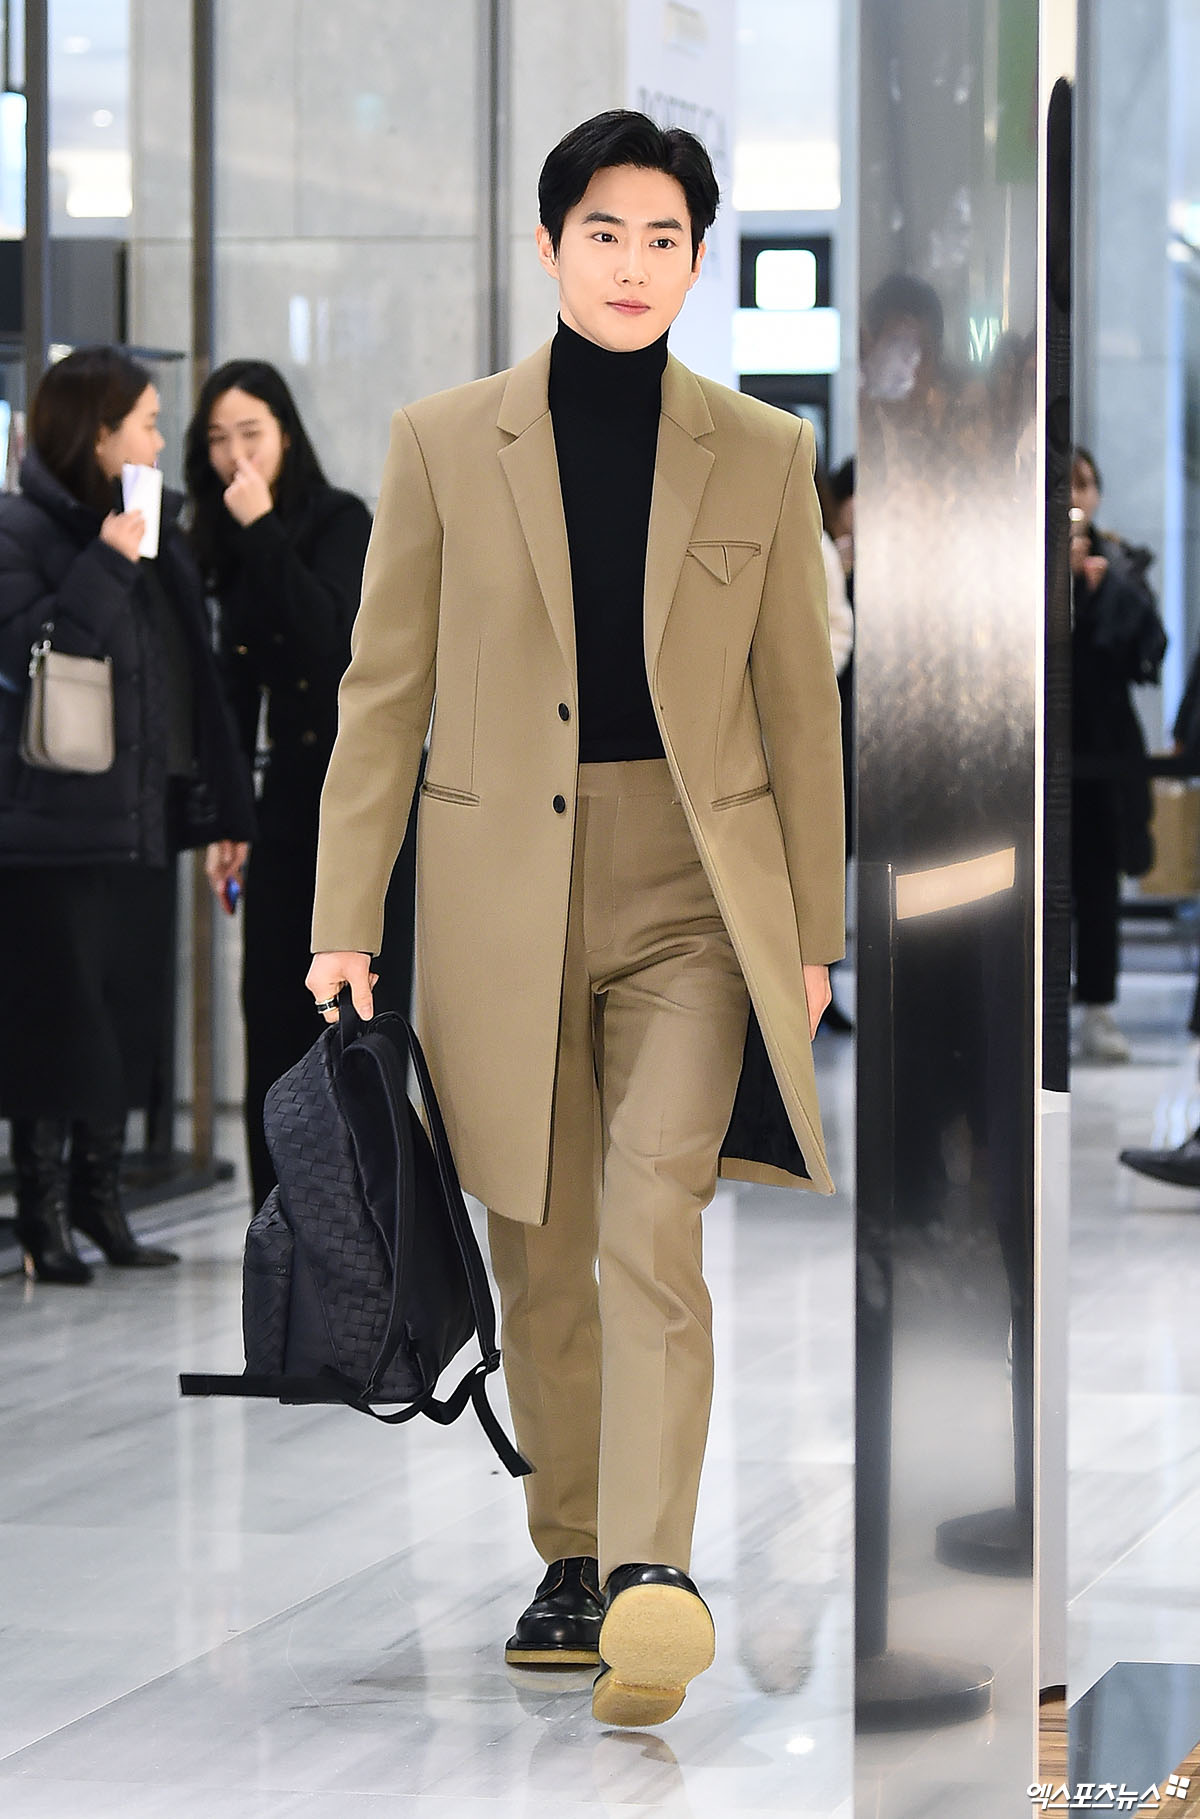 EXO Suho, who attended the opening event of the Bottega Veneta Pouch Pop-up Store held at the Hyodai Department Store Pangyo branch in Baekhyun-dong, Gyeonggi Province, on the afternoon of the 6th, has photo time.